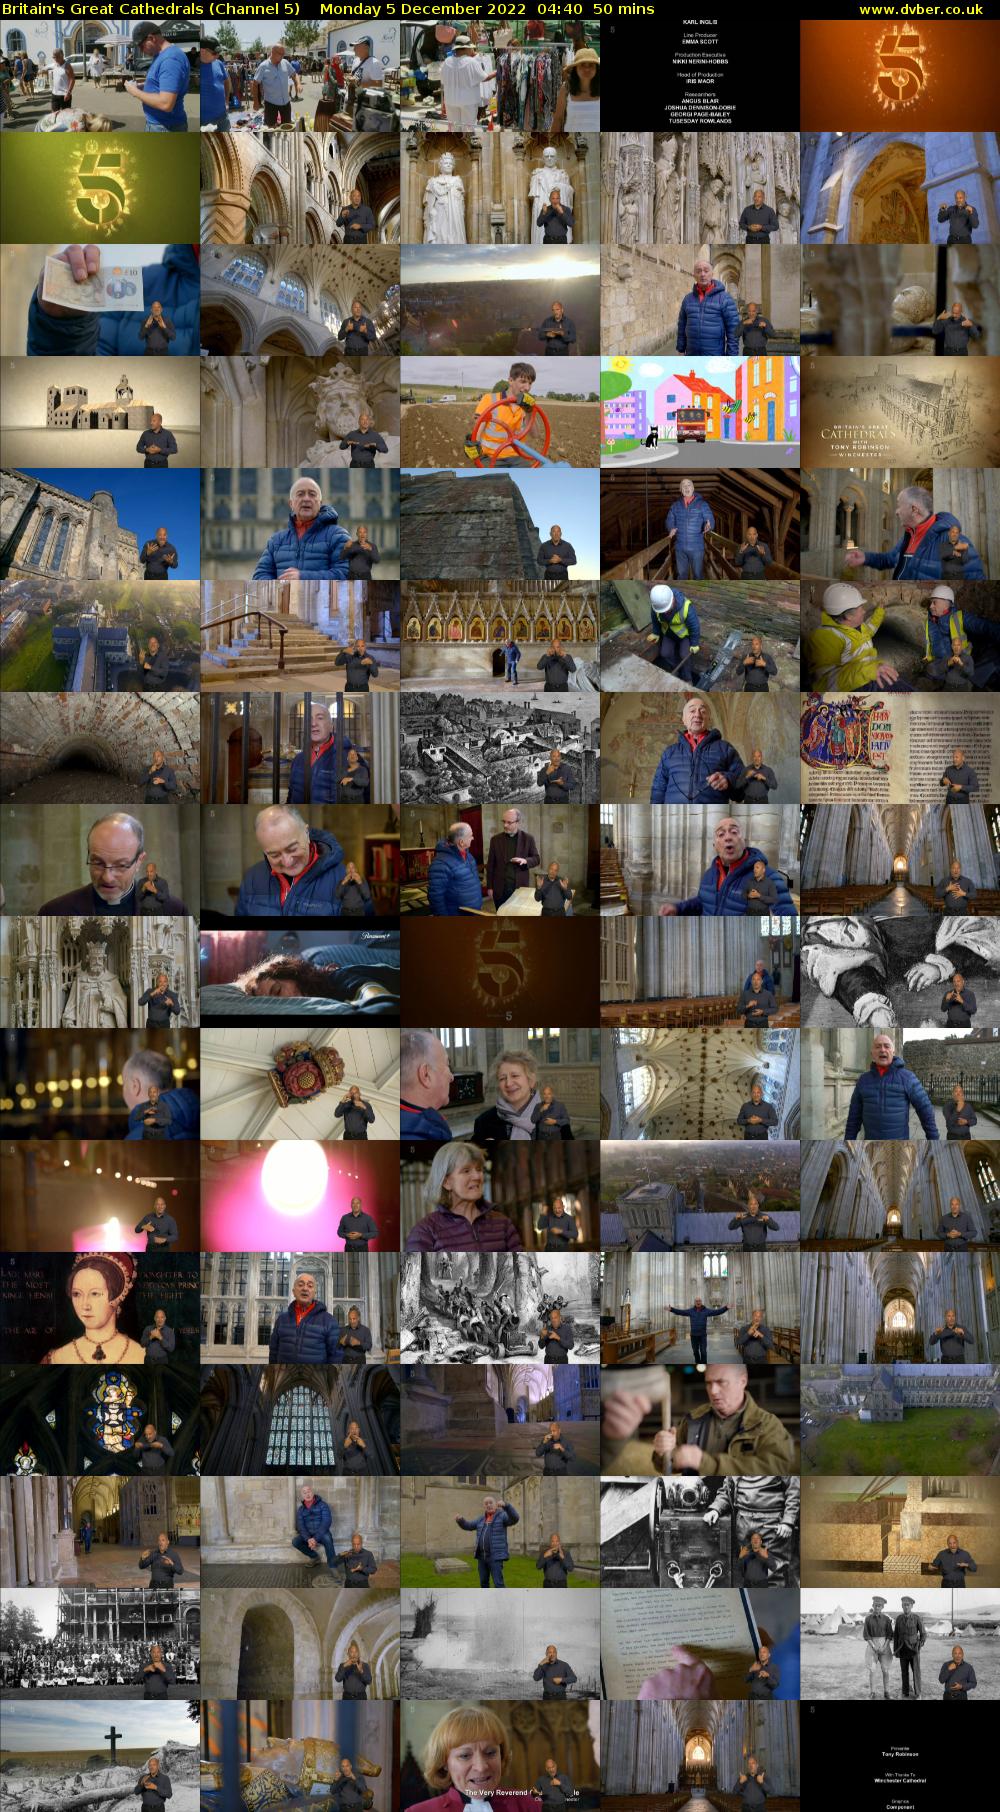 Britain's Great Cathedrals (Channel 5) Monday 5 December 2022 04:40 - 05:30